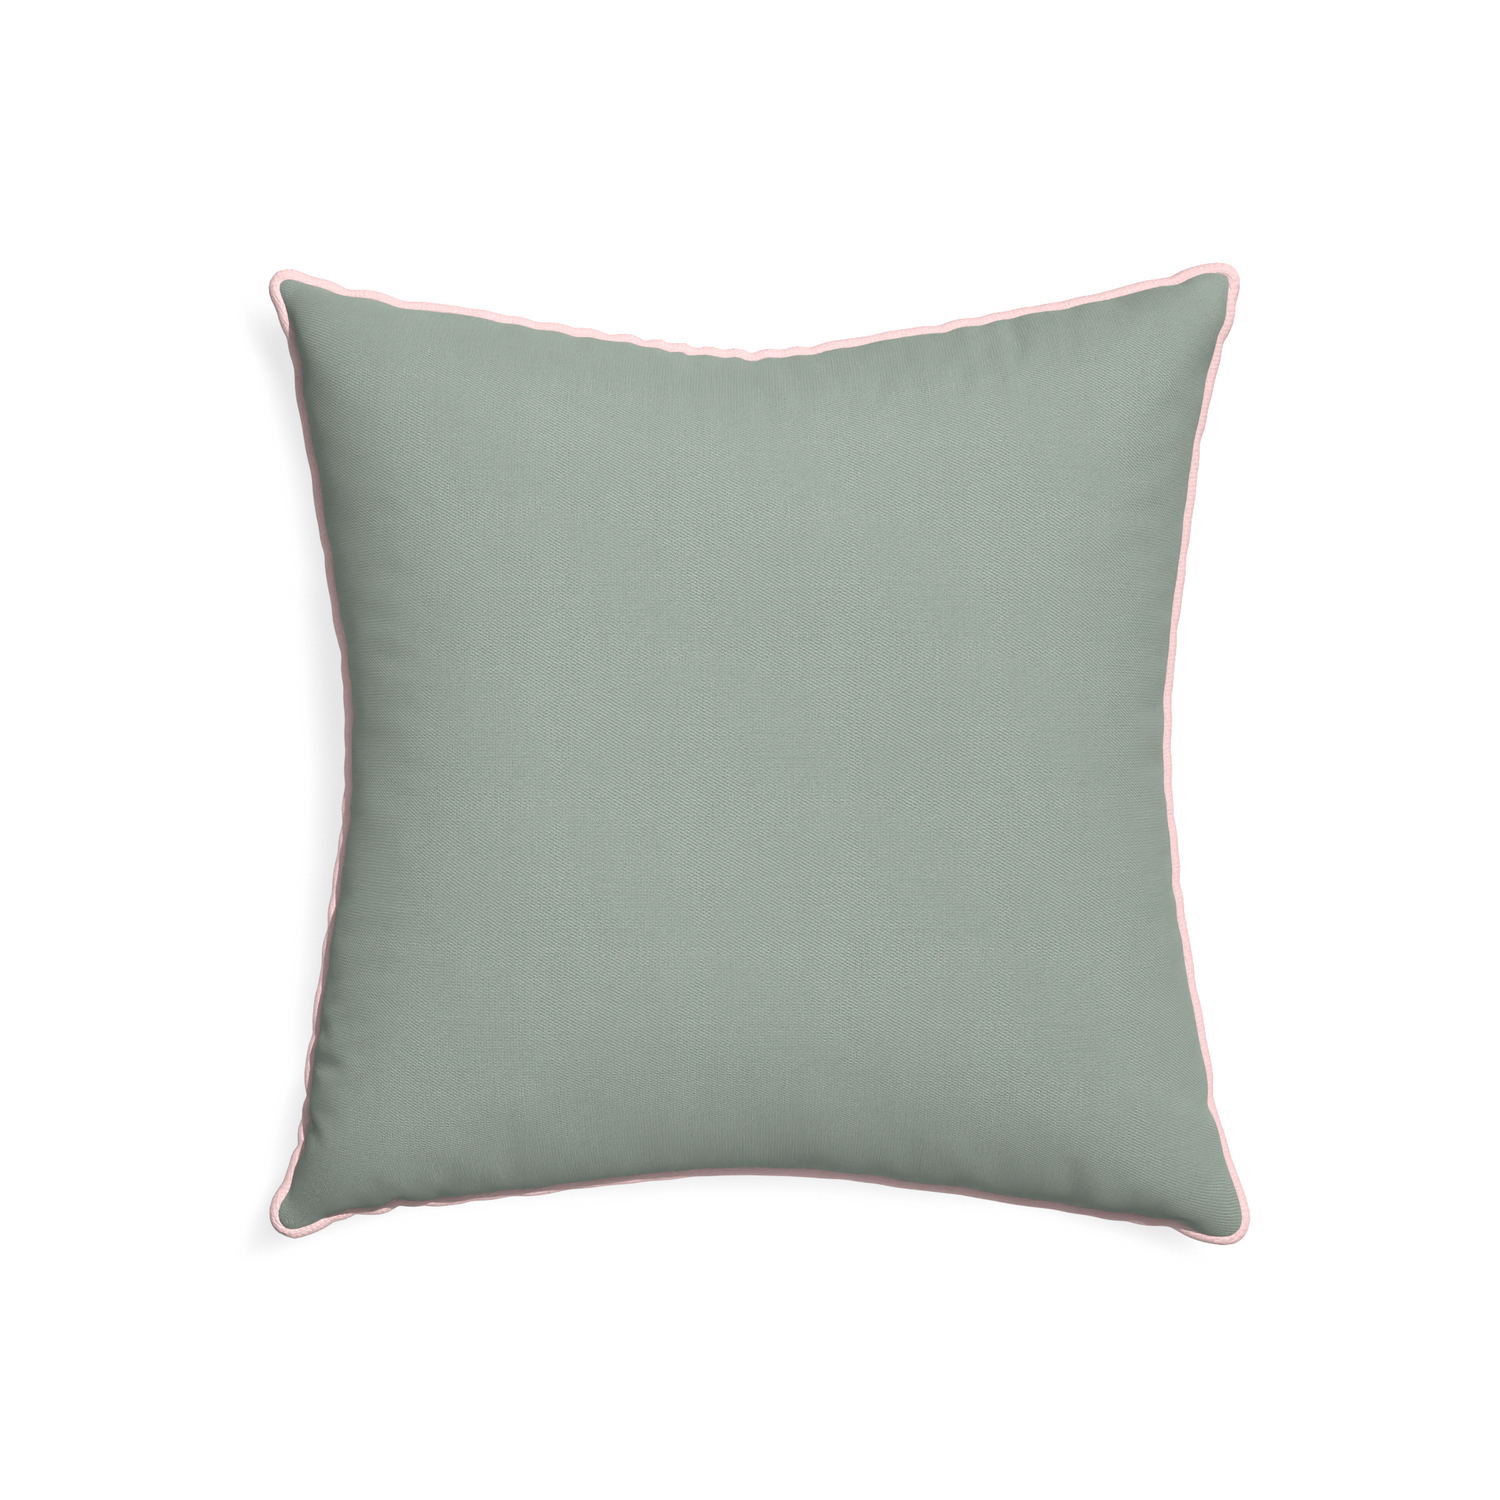 22-square sage custom sage green cottonpillow with petal piping on white background